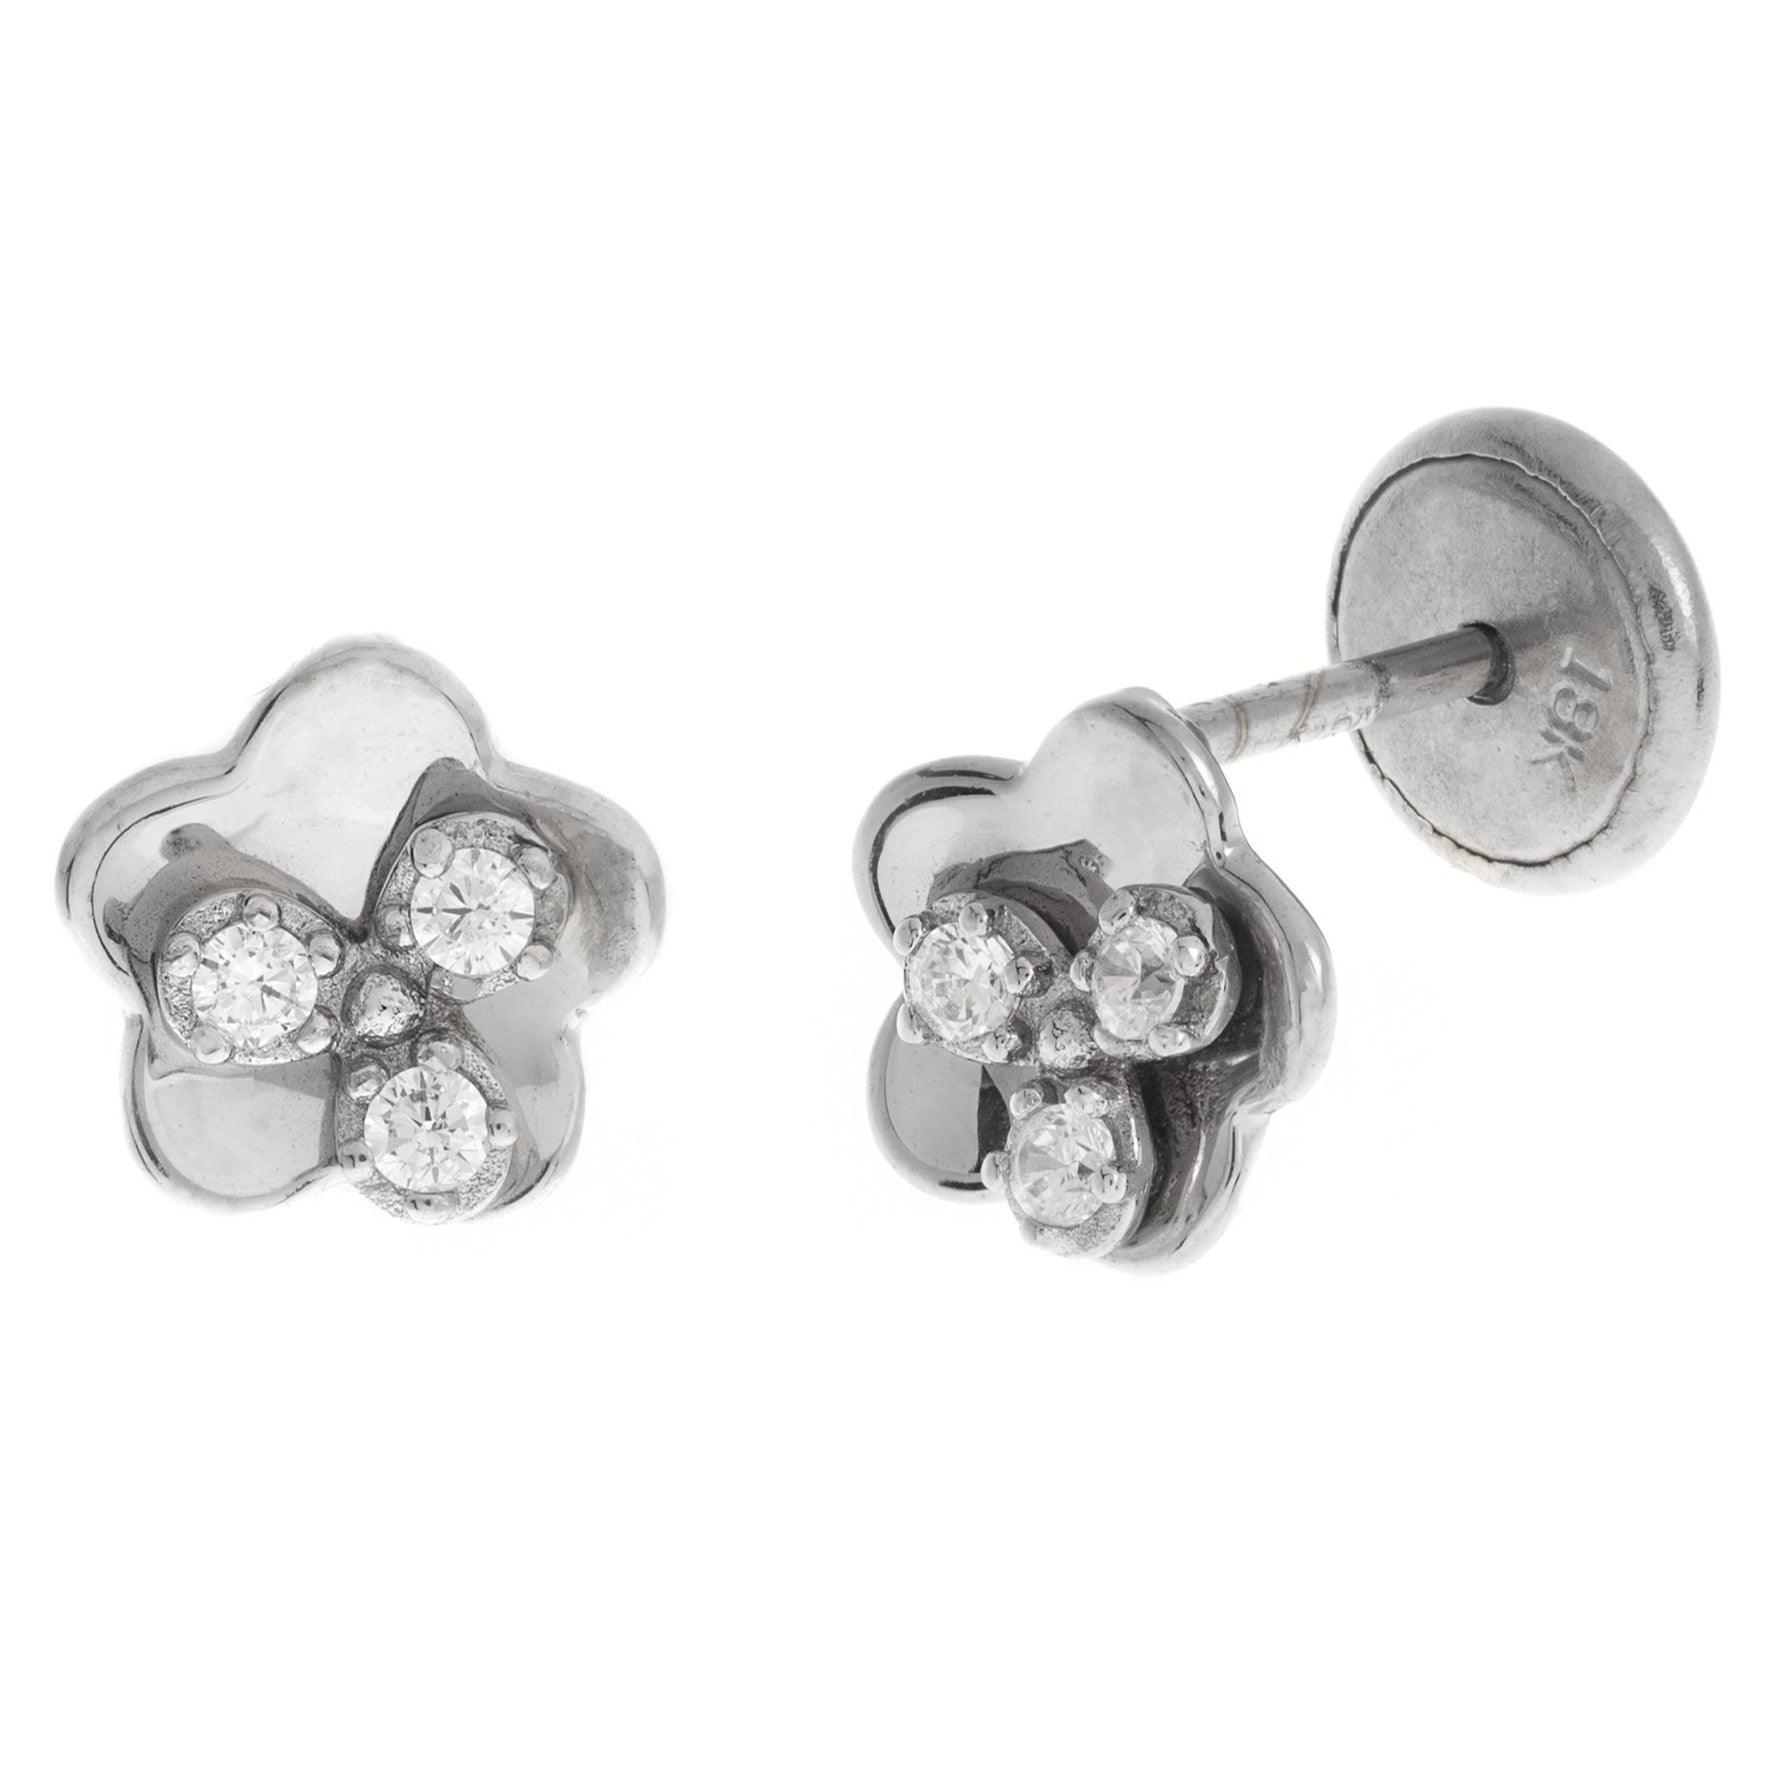 18ct White Gold Earrings set with Cubic Zirconia stones (0.8g) E-2964